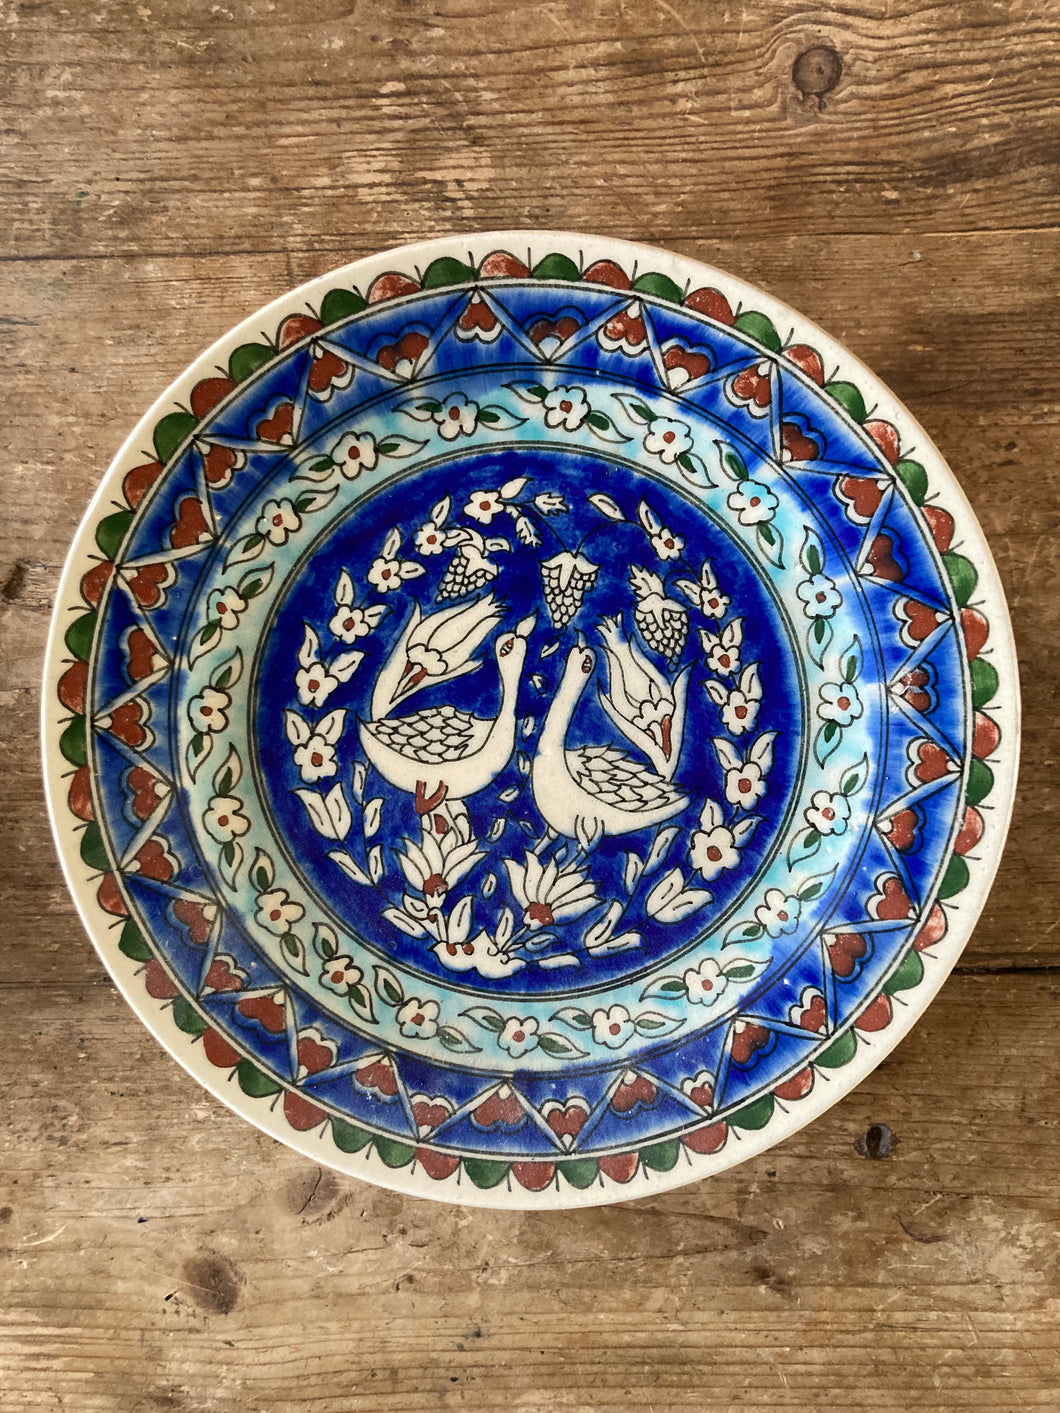 Hand painted plate with geese and tulips from Kutahya, Turkey